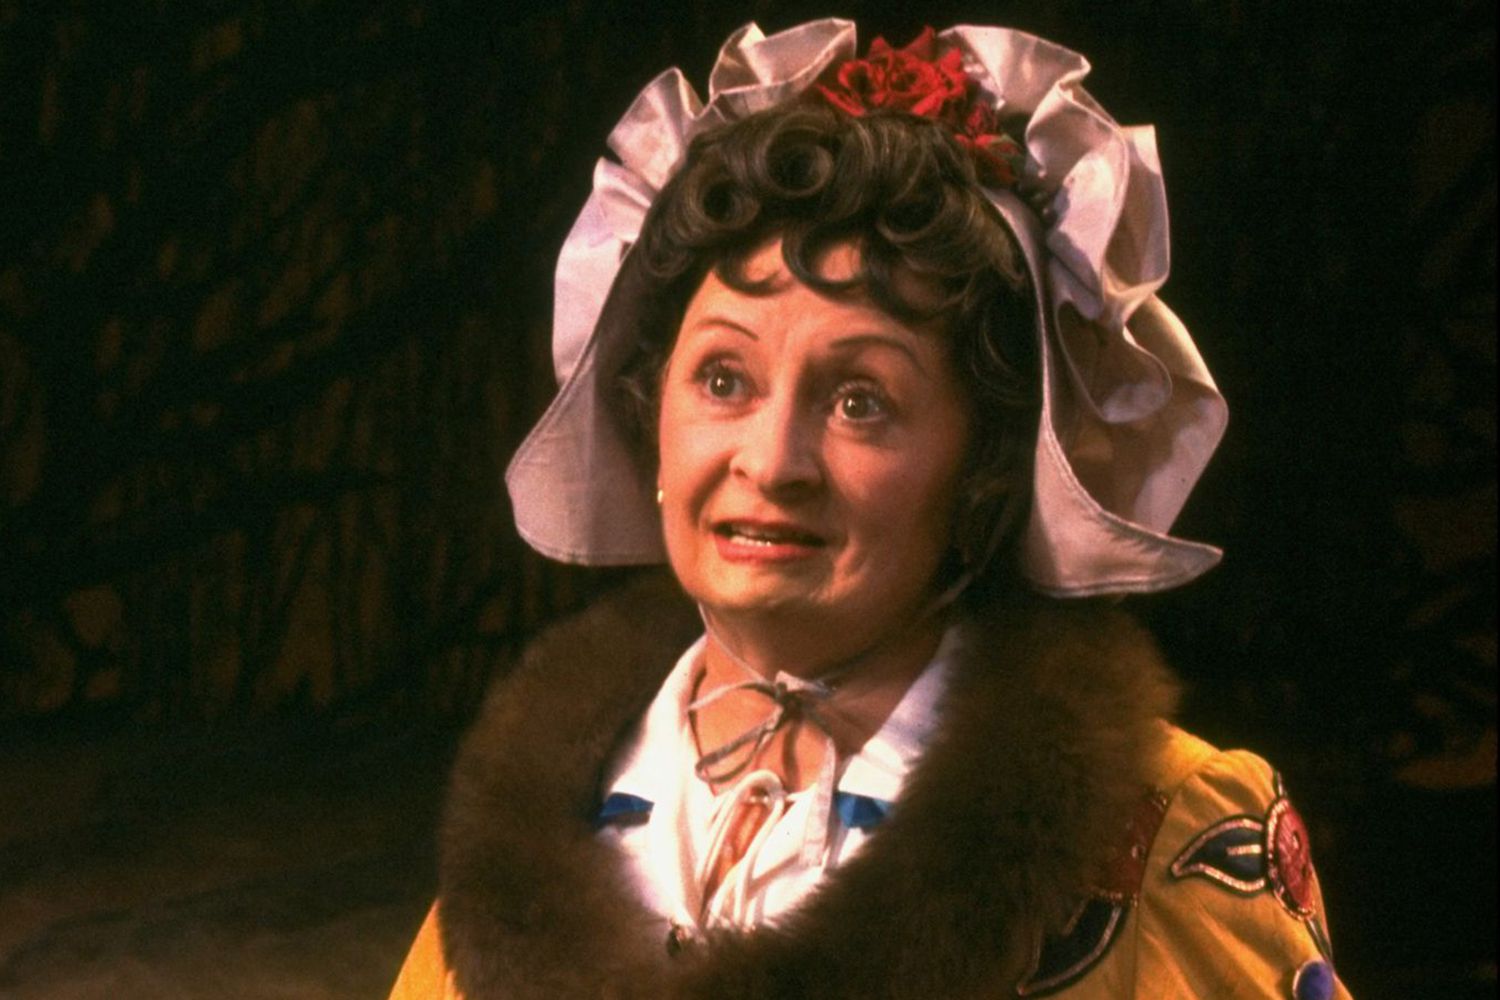 Barbara Bryne as Jack's Mother in a scene from the Broadway production of the musical "Into The Woods."